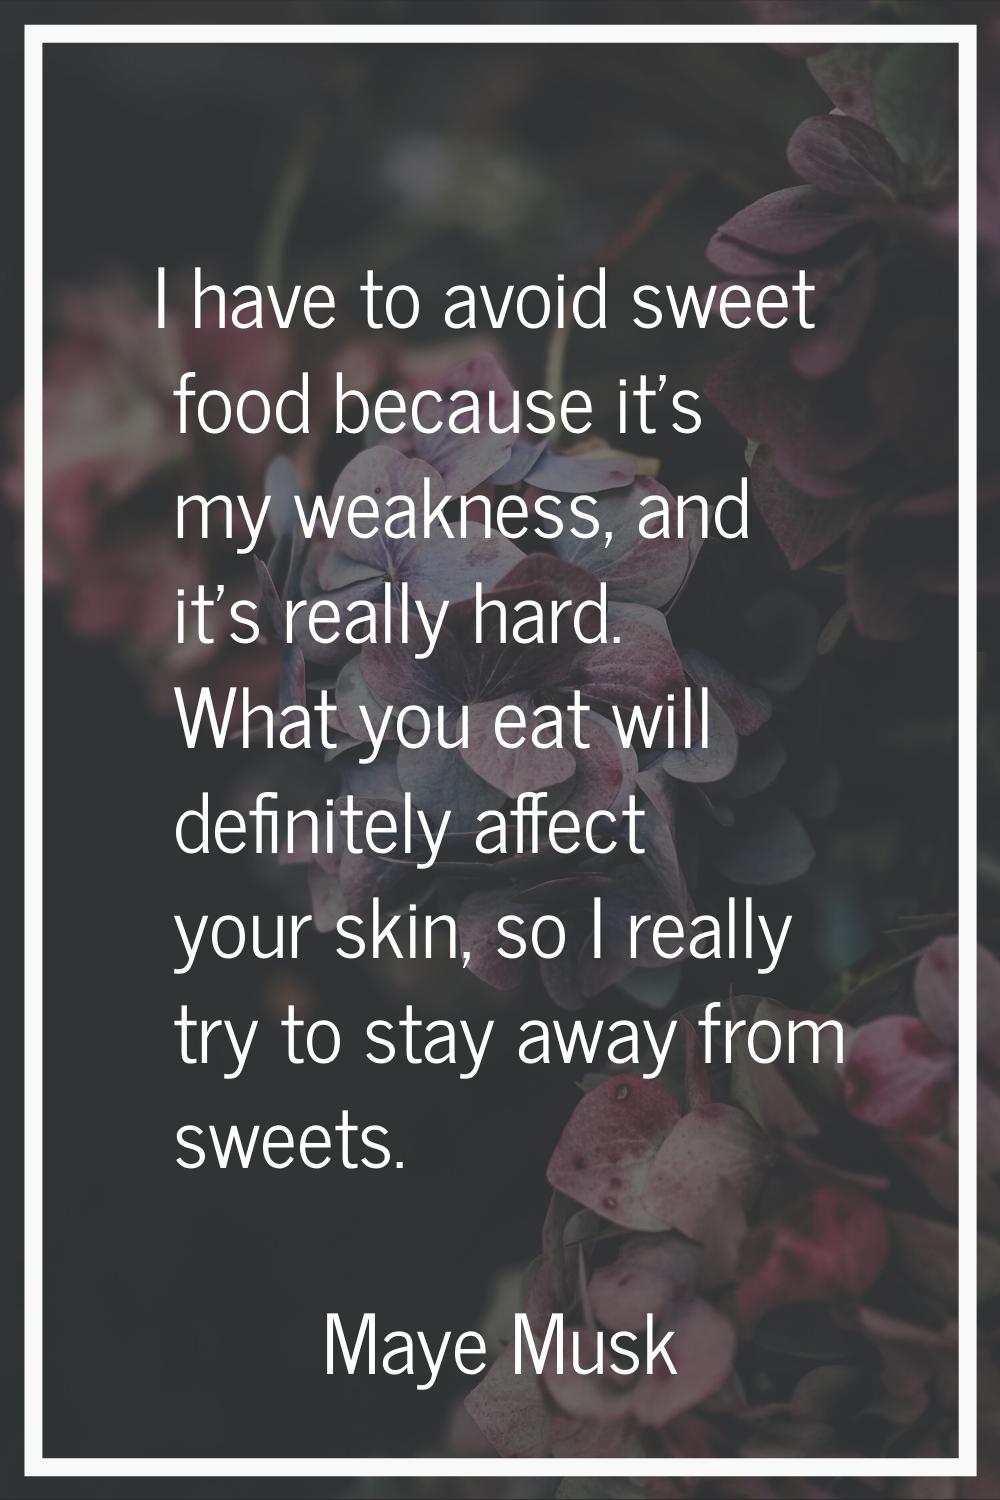 I have to avoid sweet food because it's my weakness, and it's really hard. What you eat will defini